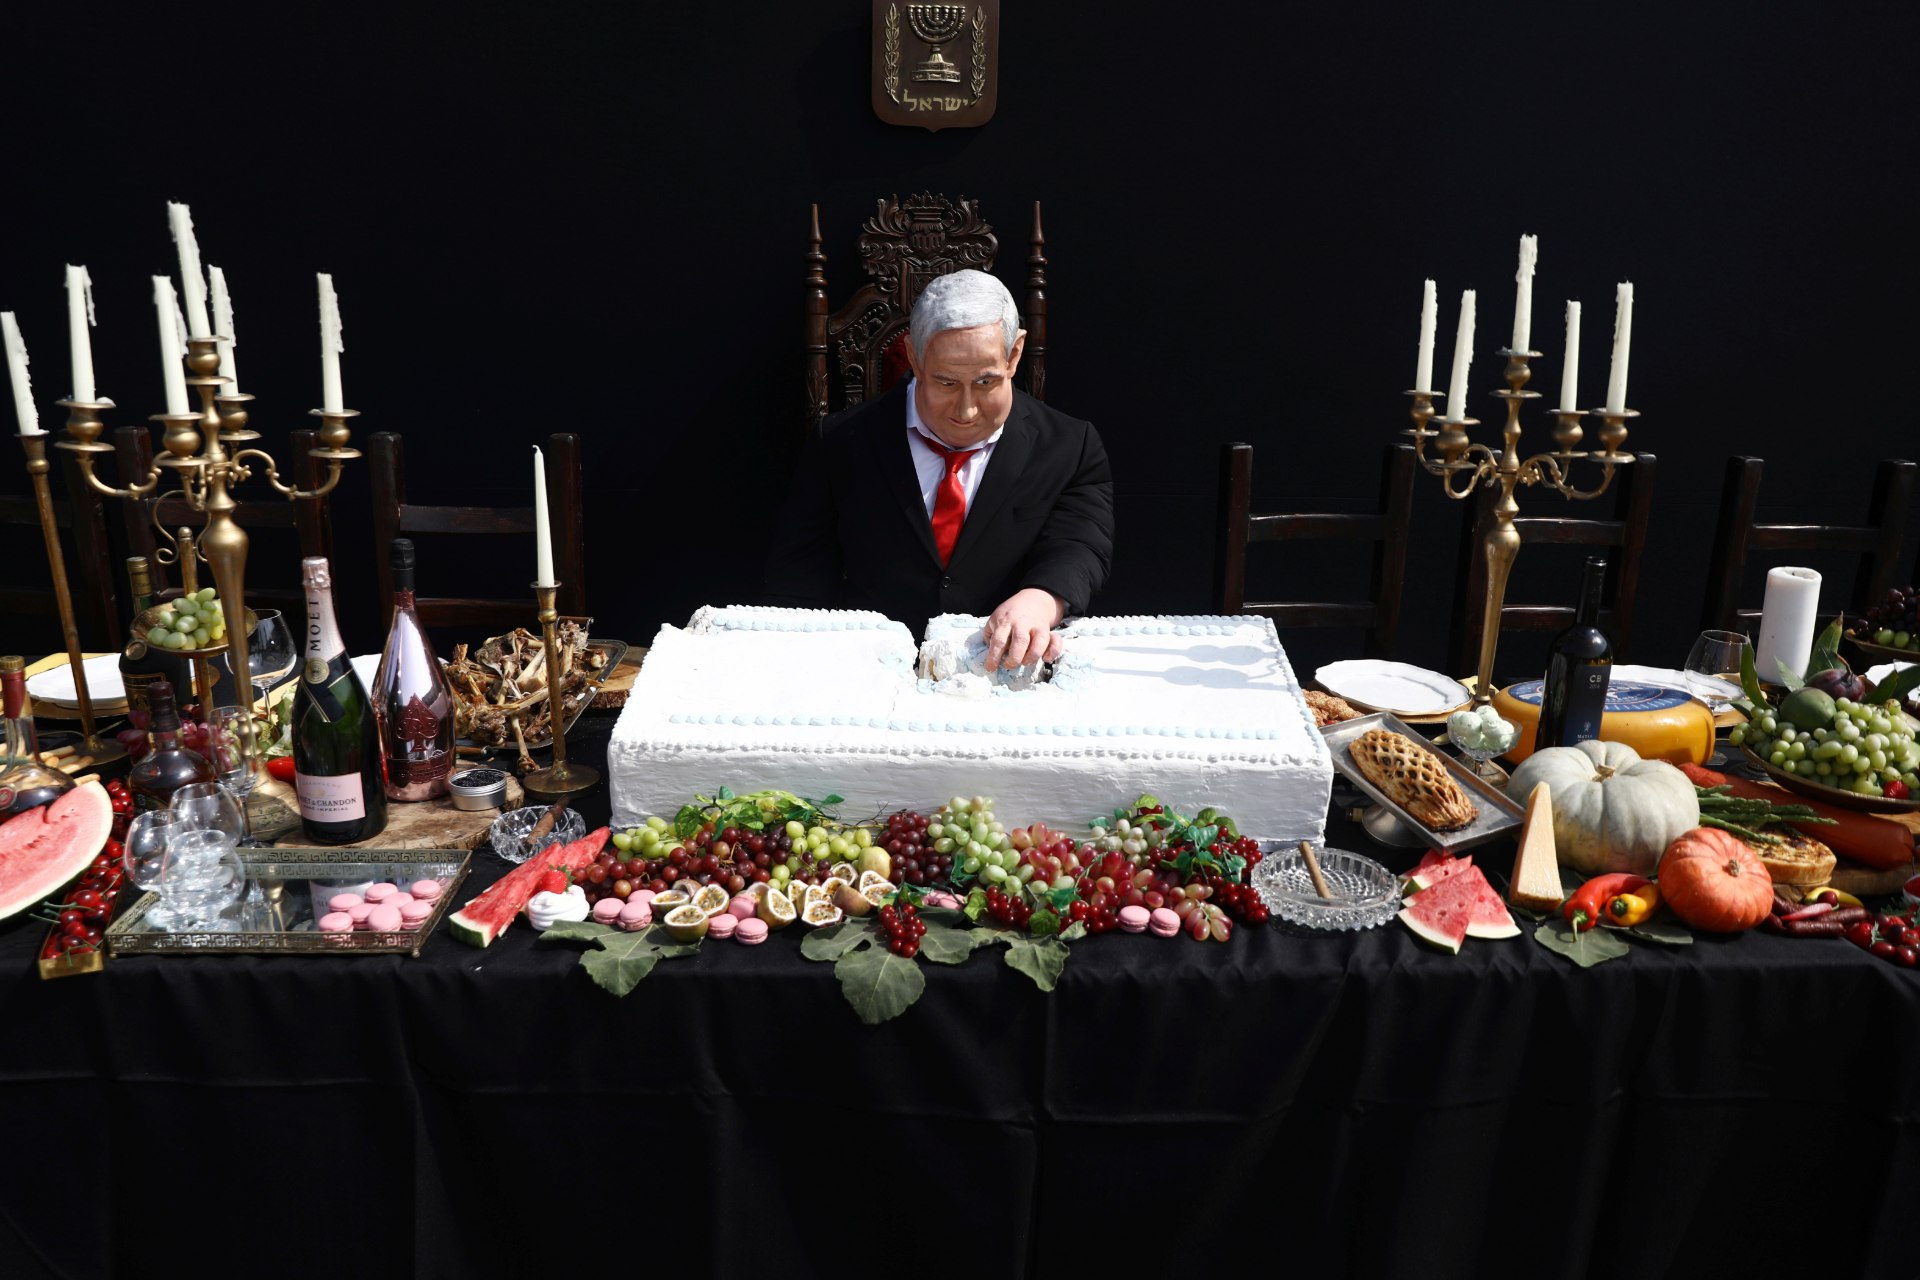 An artwork by Israeli artist Itay Zalait, that includes a sculpture of Israeli Prime Minister Benjamin Netanyahu sitting at a table recalling the famous "Last Supper" (Reuters)